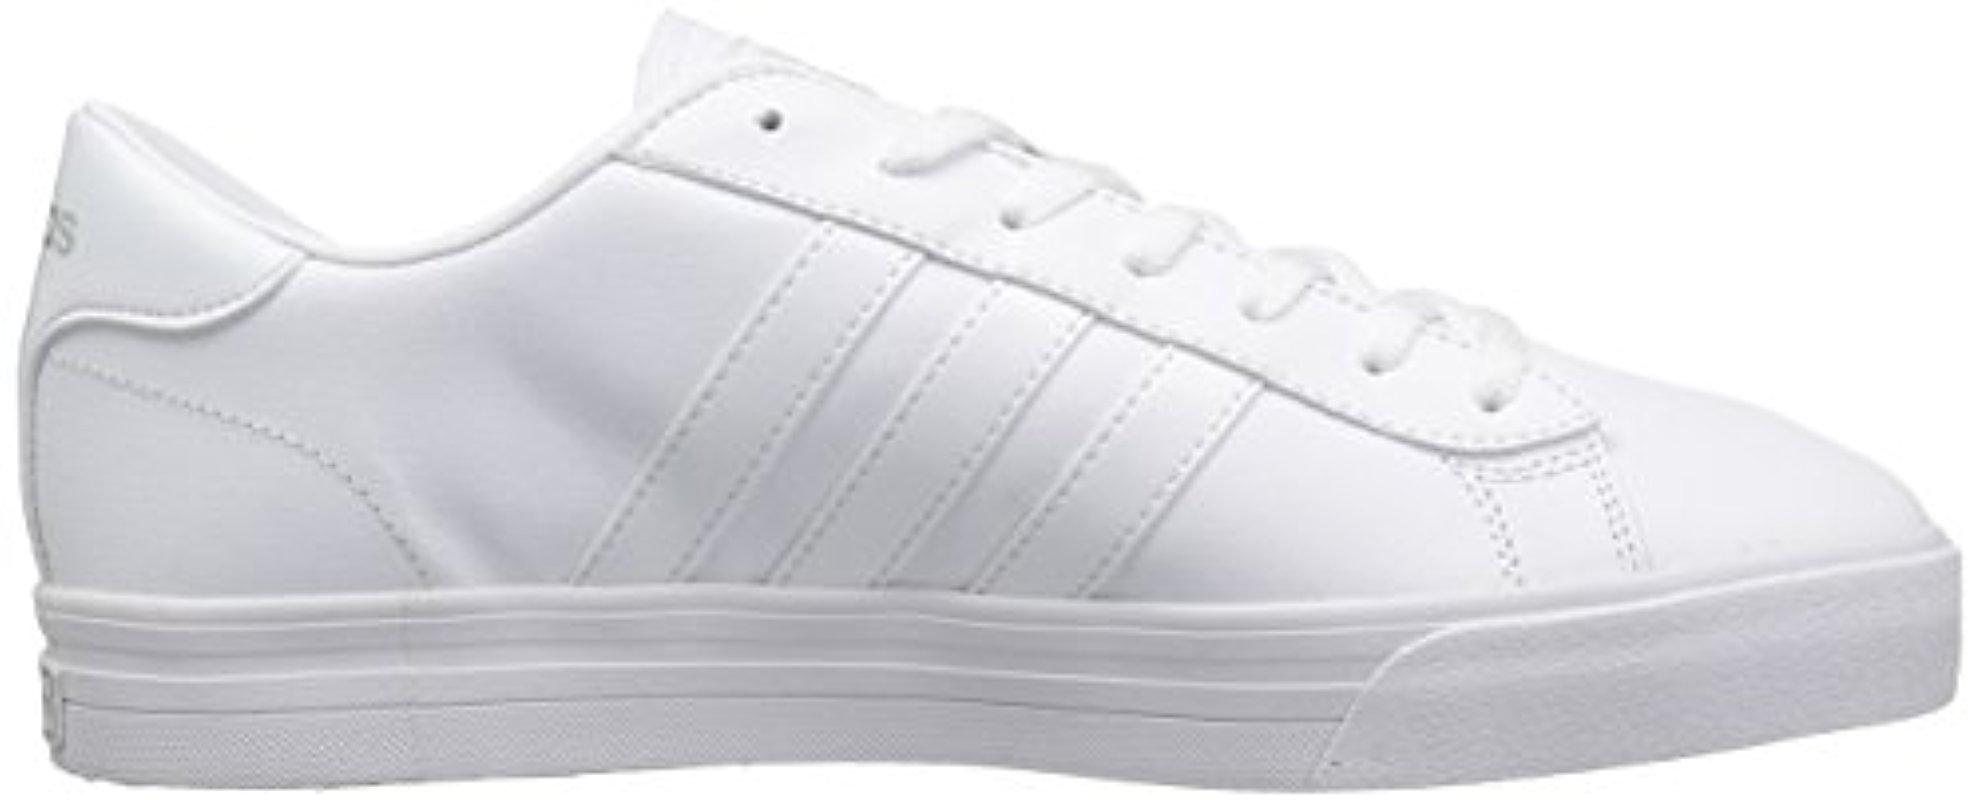 adidas Leather Cloudfoam Super Daily Sneakers in White/Silver (White ...